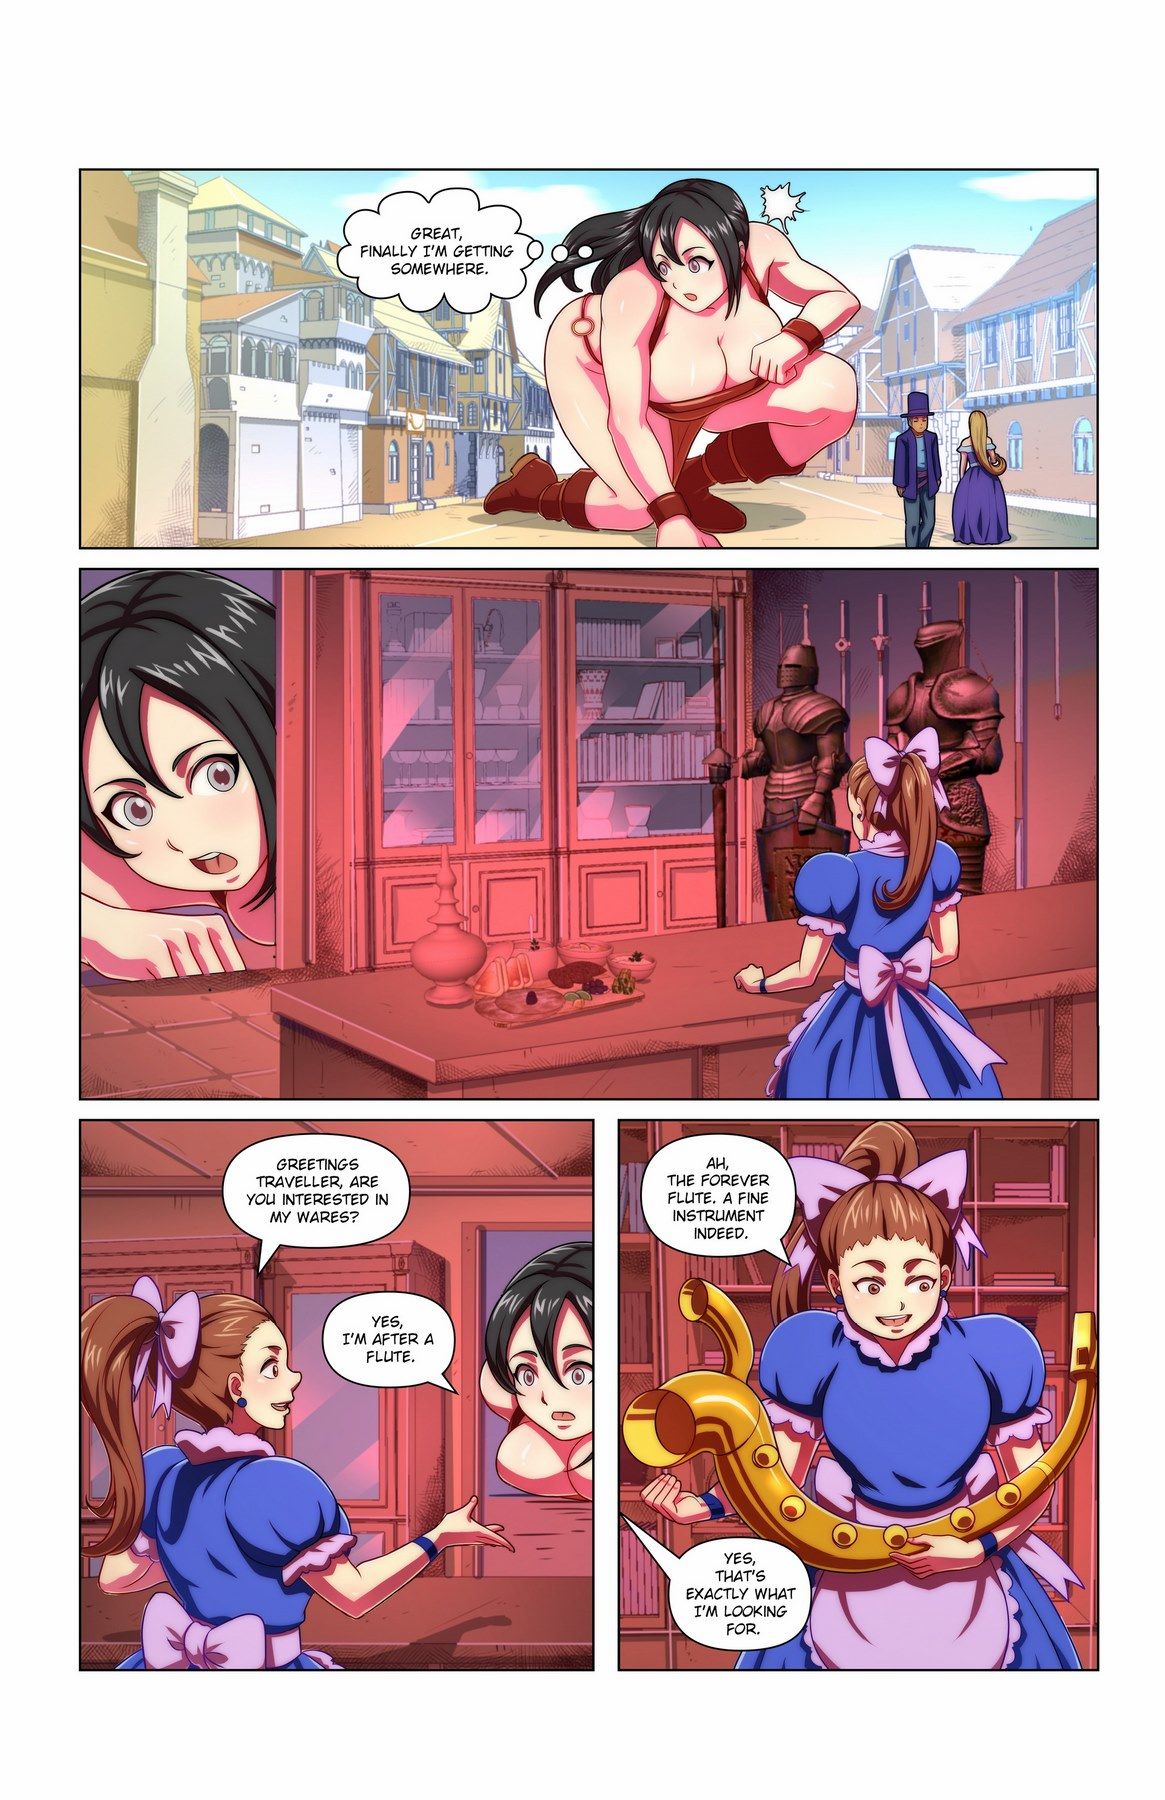 Giantess RPG Issue 2 GiantessFan page 13